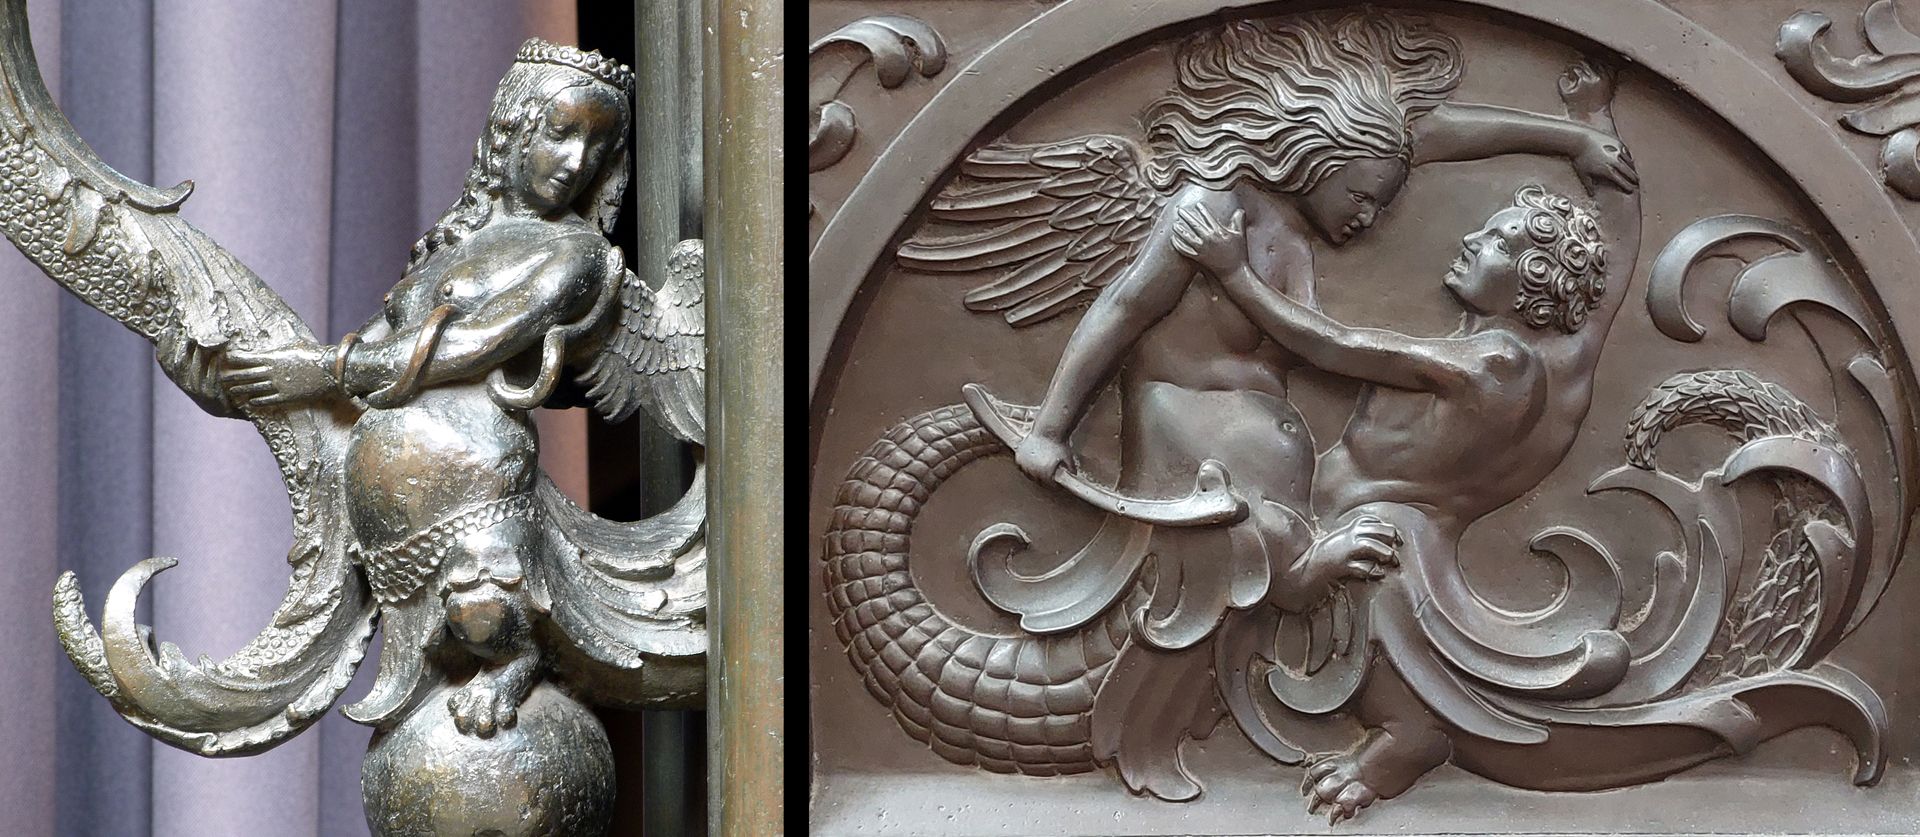 Graveslab of Godert Wigerinck Coat of arms of the Image comparison: on the left, mythical creature as a candlestick on the tomb of Sebaldus (1508 - 1519)